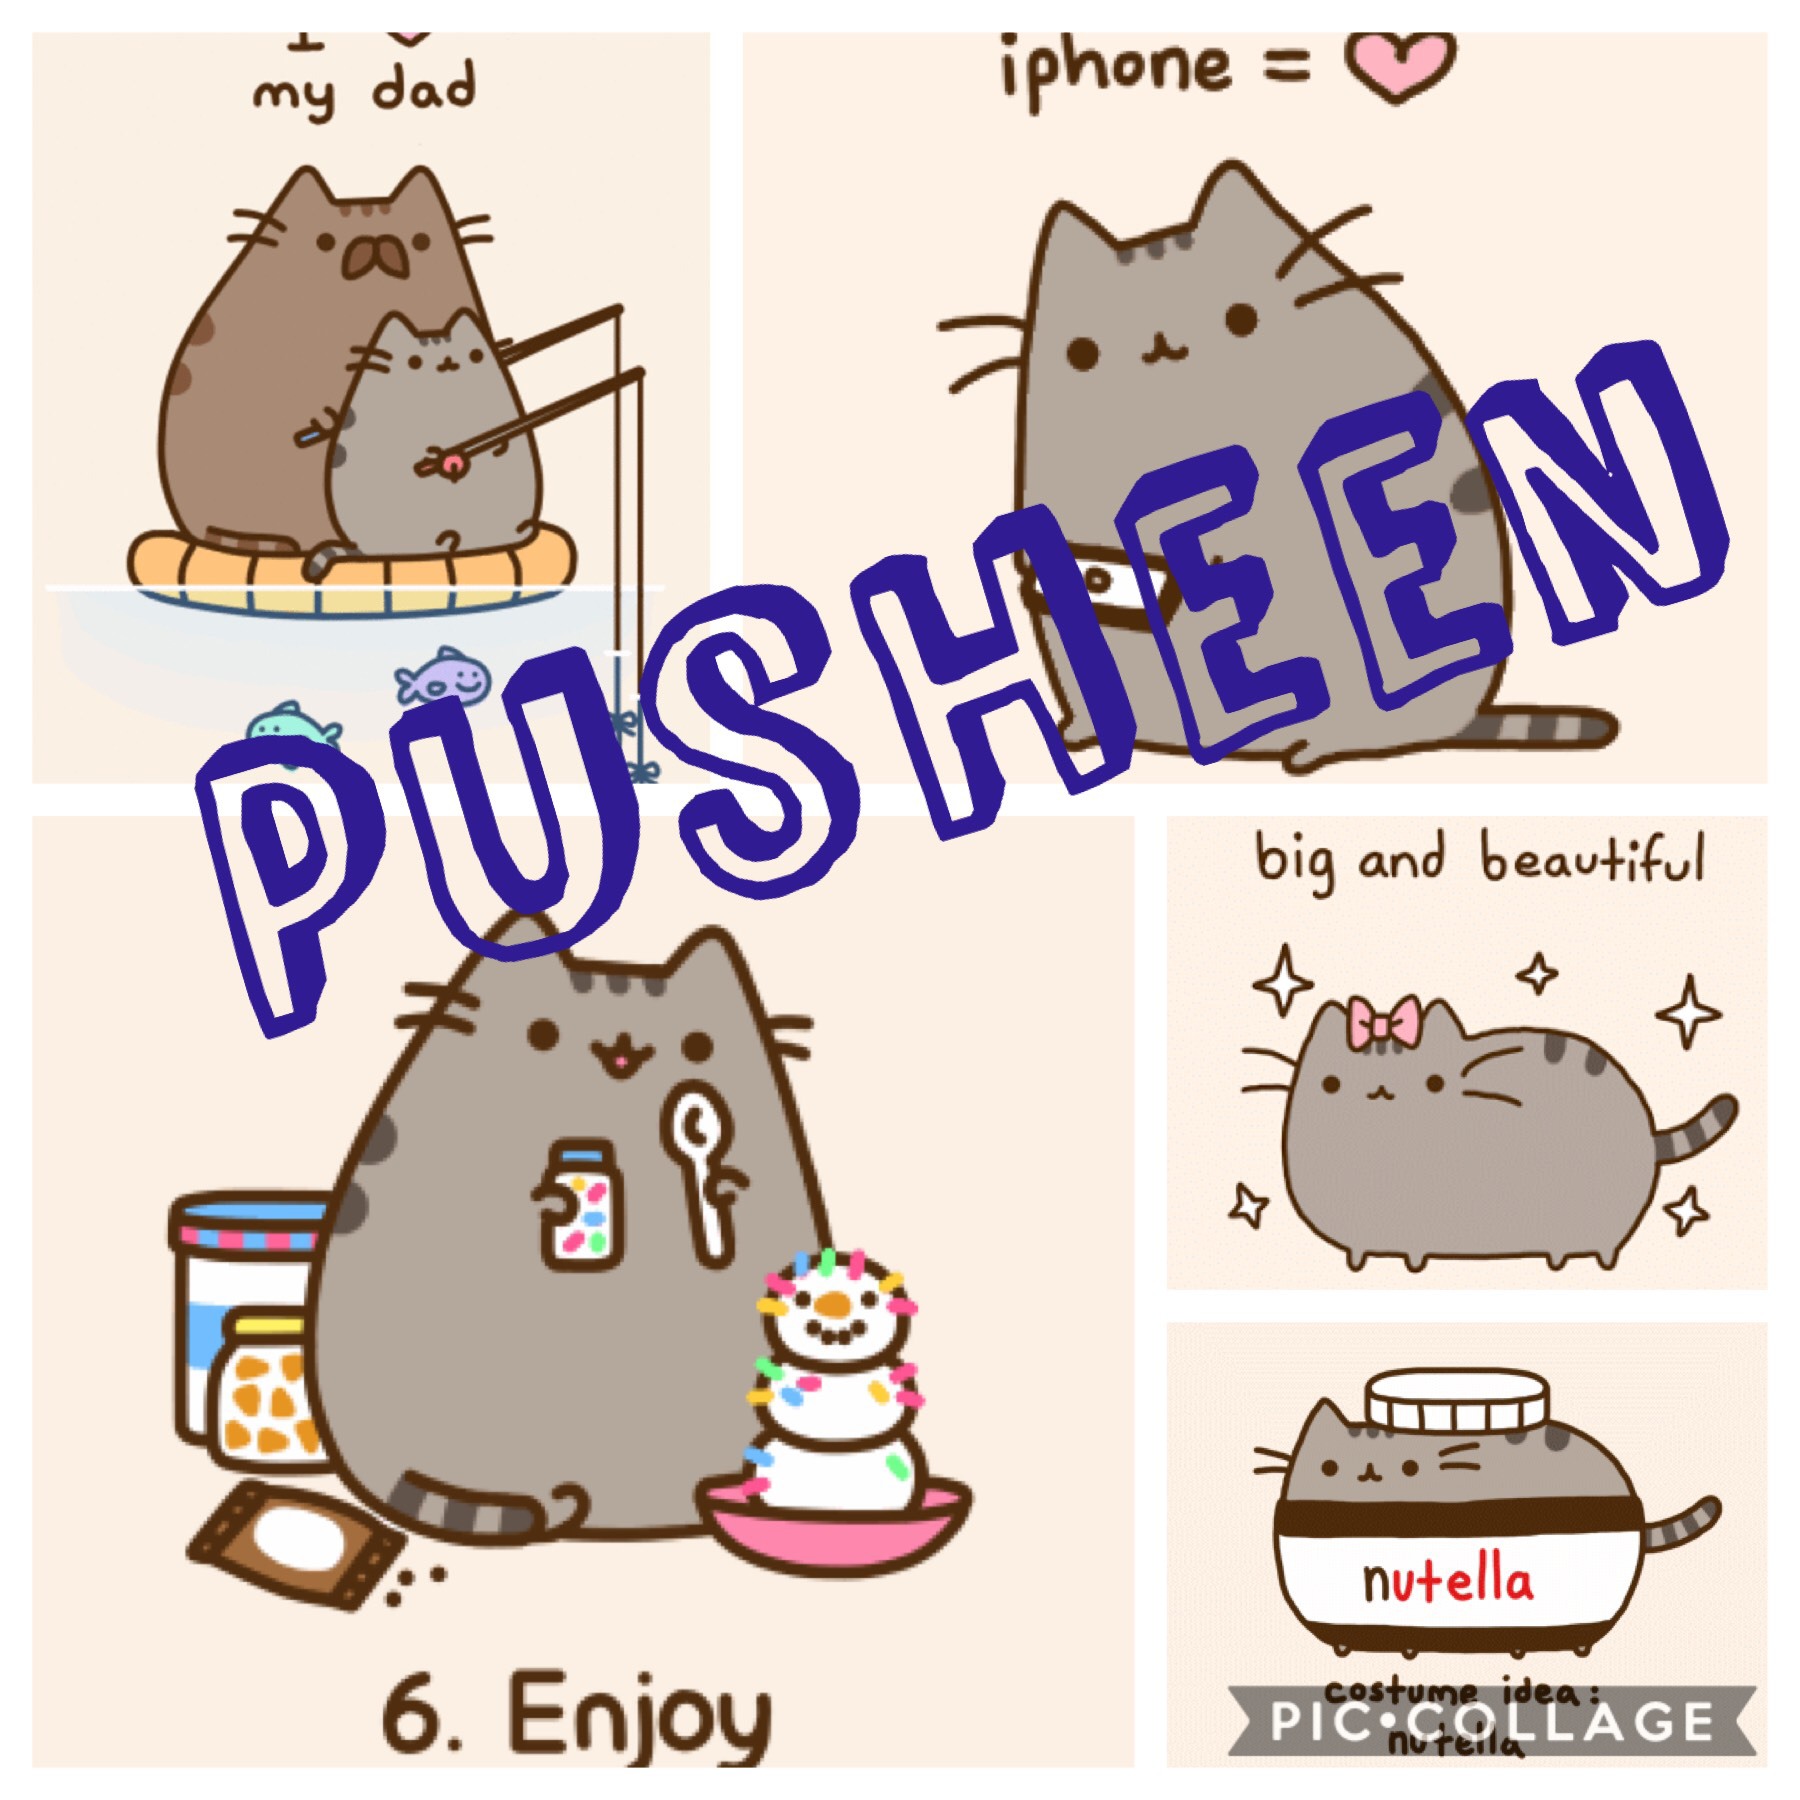 I’m not a fan of pusheen but here is the cuteness